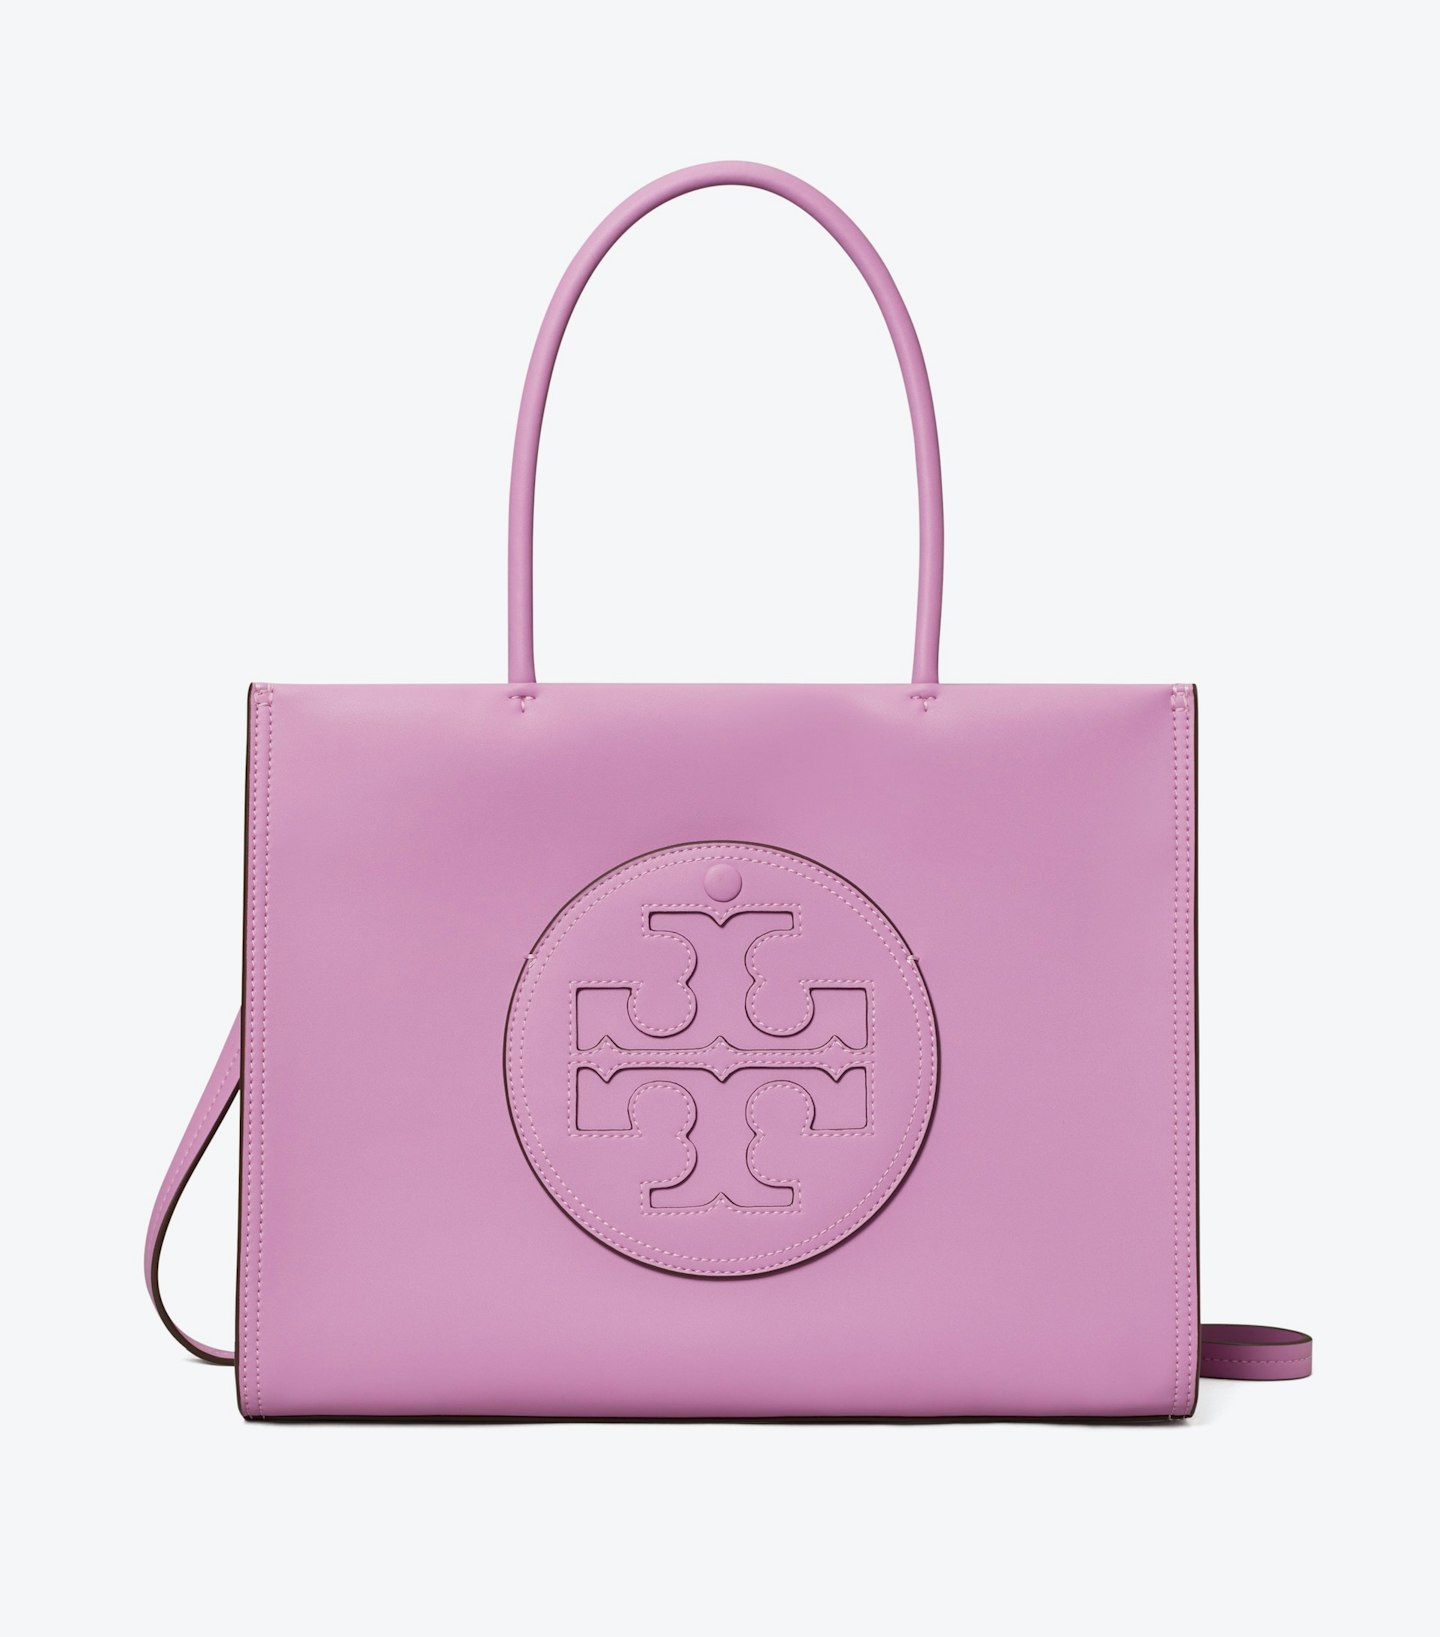 Let's Chat About The Mulberry Sadie Satchel Bag - Fashion For Lunch.